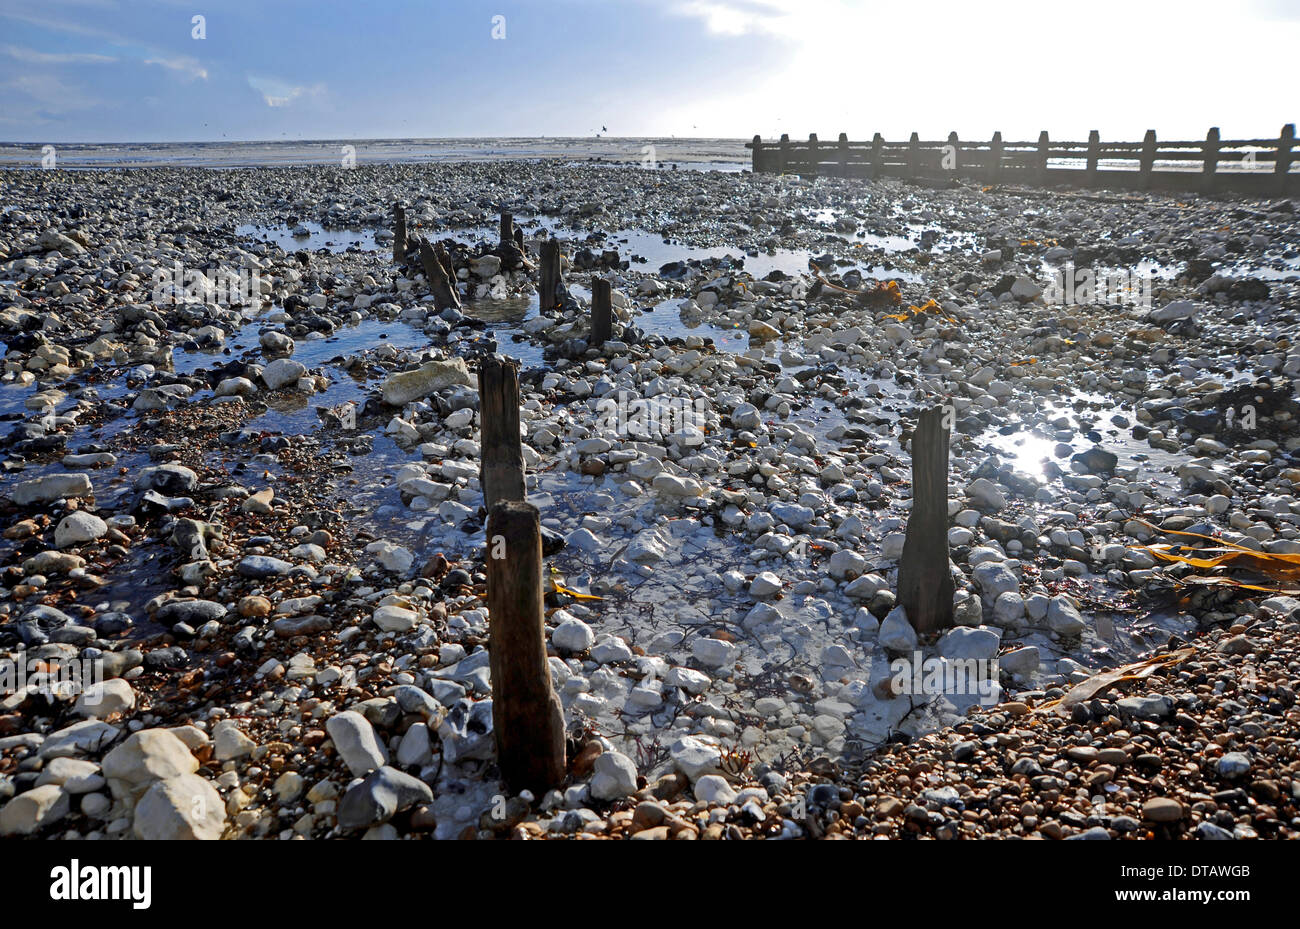 The recent storms and high tides have unearthed old World War 2 sea defences along the beaches at Ferring near Worthing UK Stock Photo